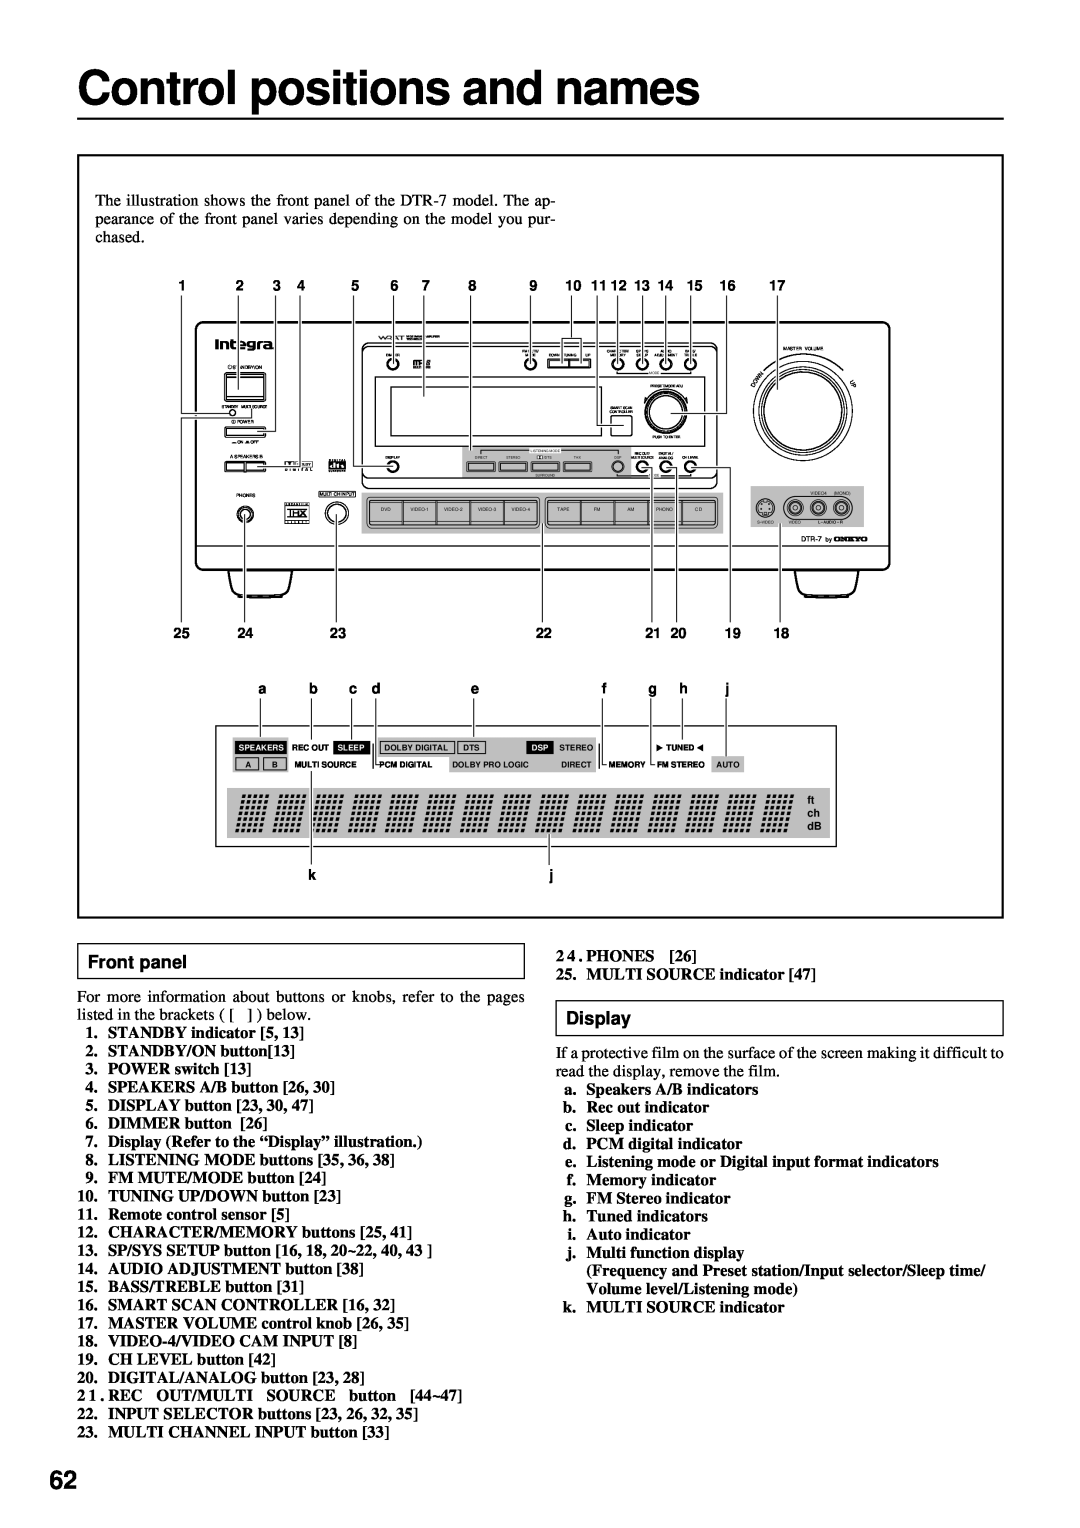 Integra DTR-7 instruction manual Control positions and names, Front panel, Display 